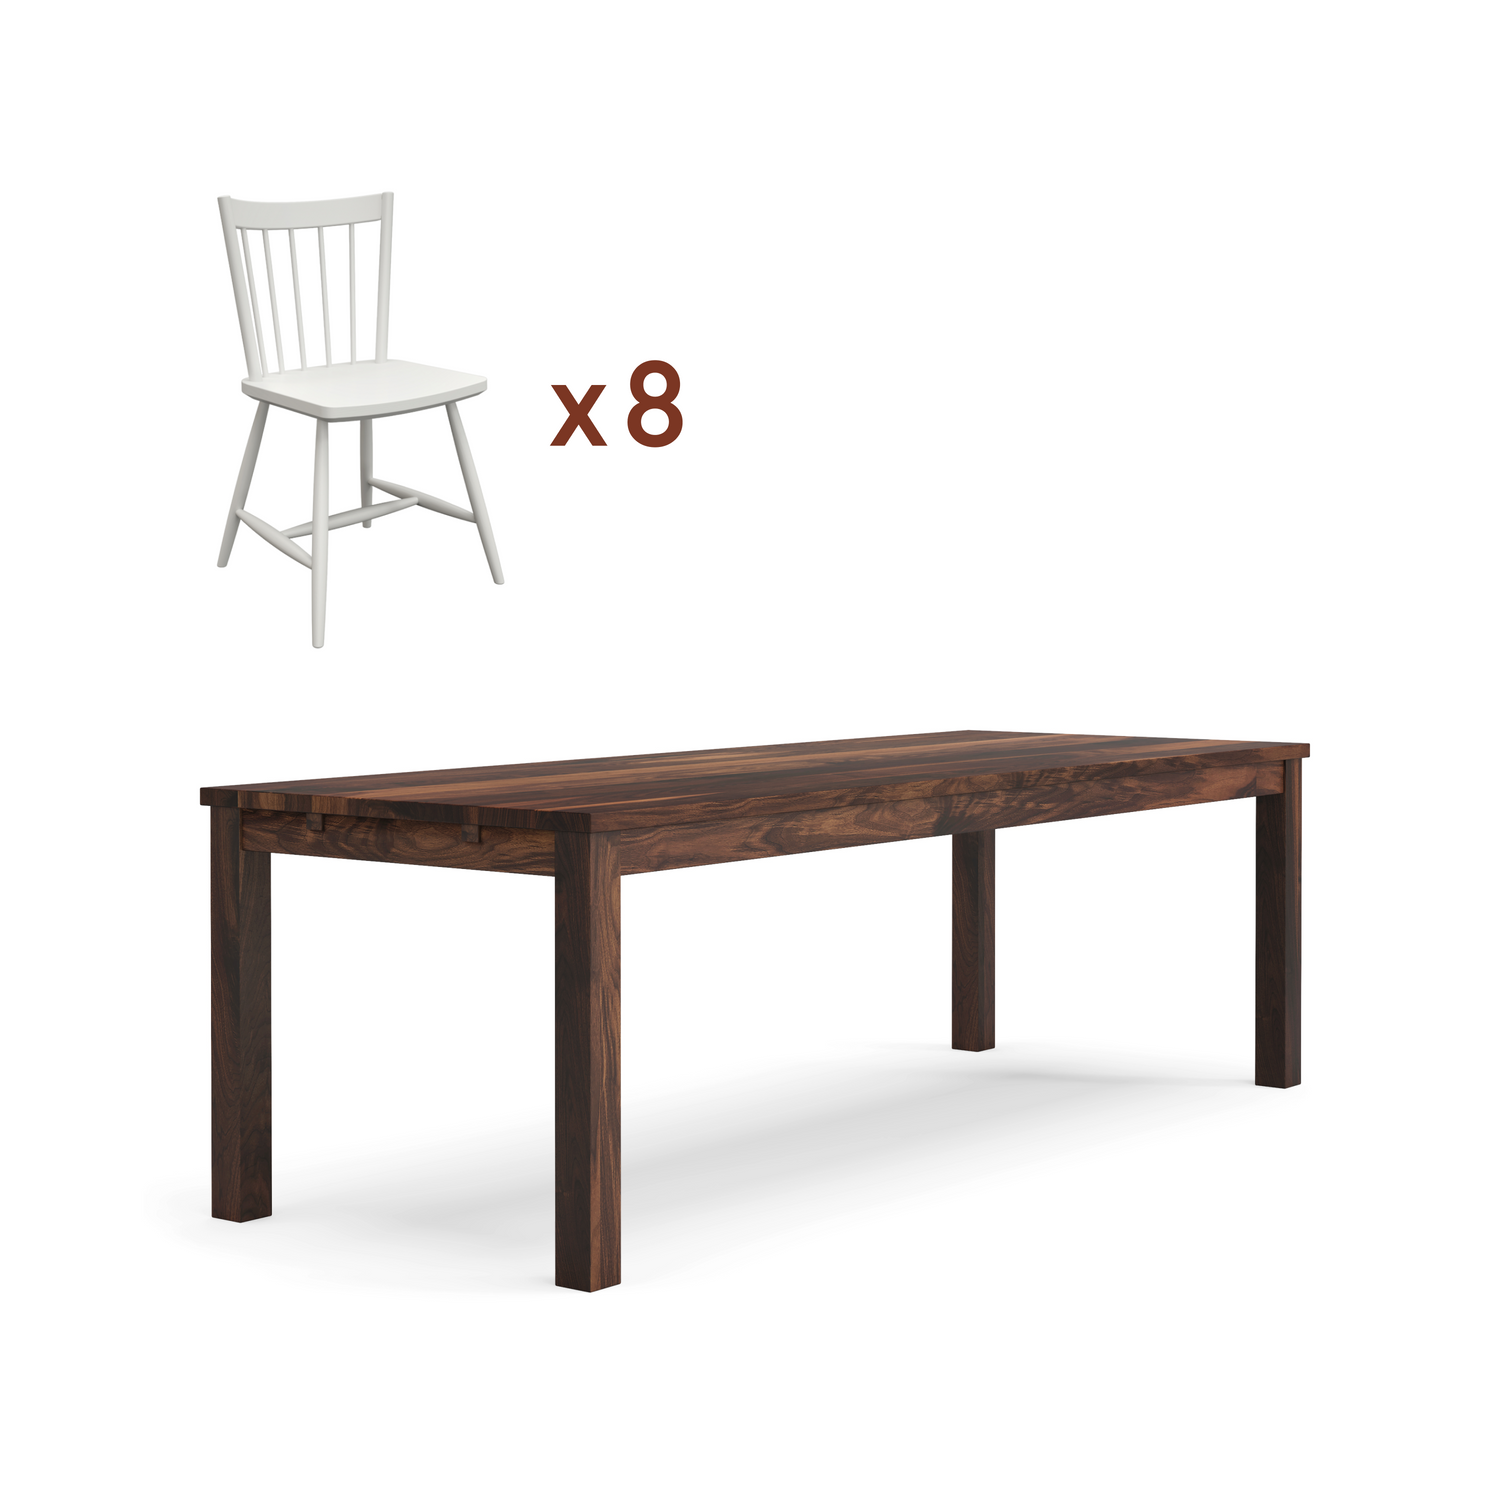 Classic table + chairs bundle